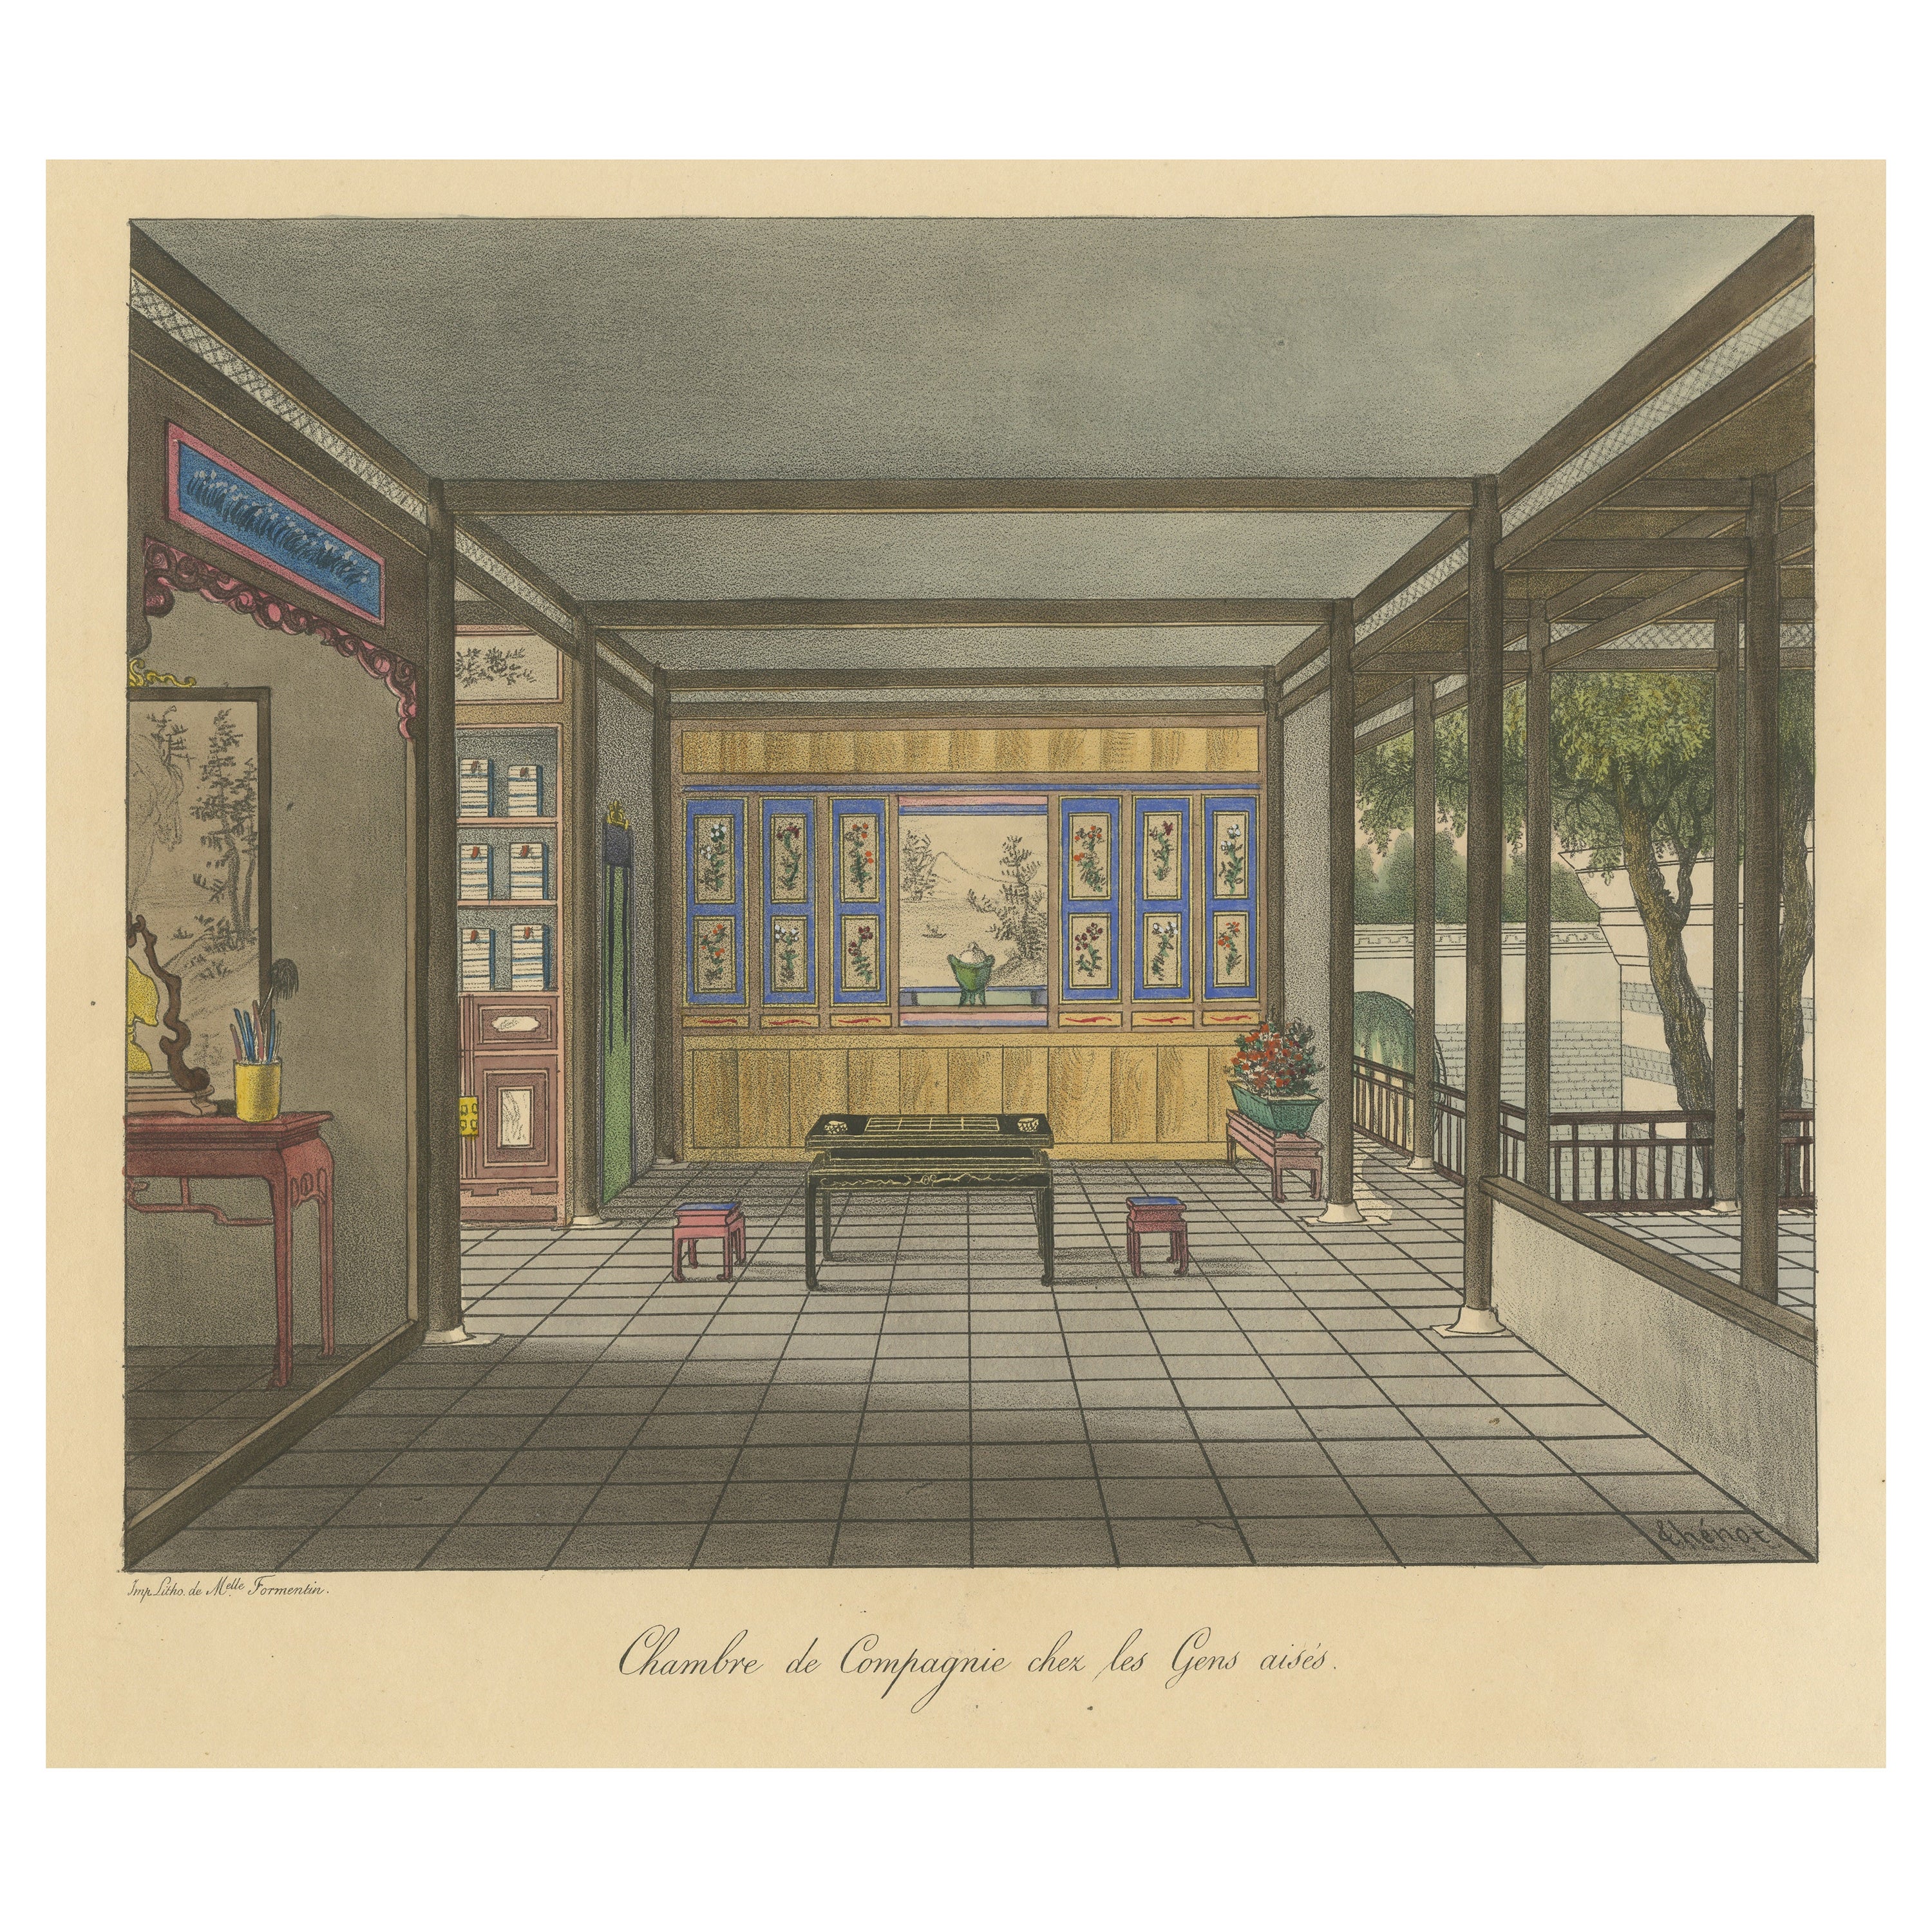 Nicely Hand-Colored Antique Print of a Chinese Room